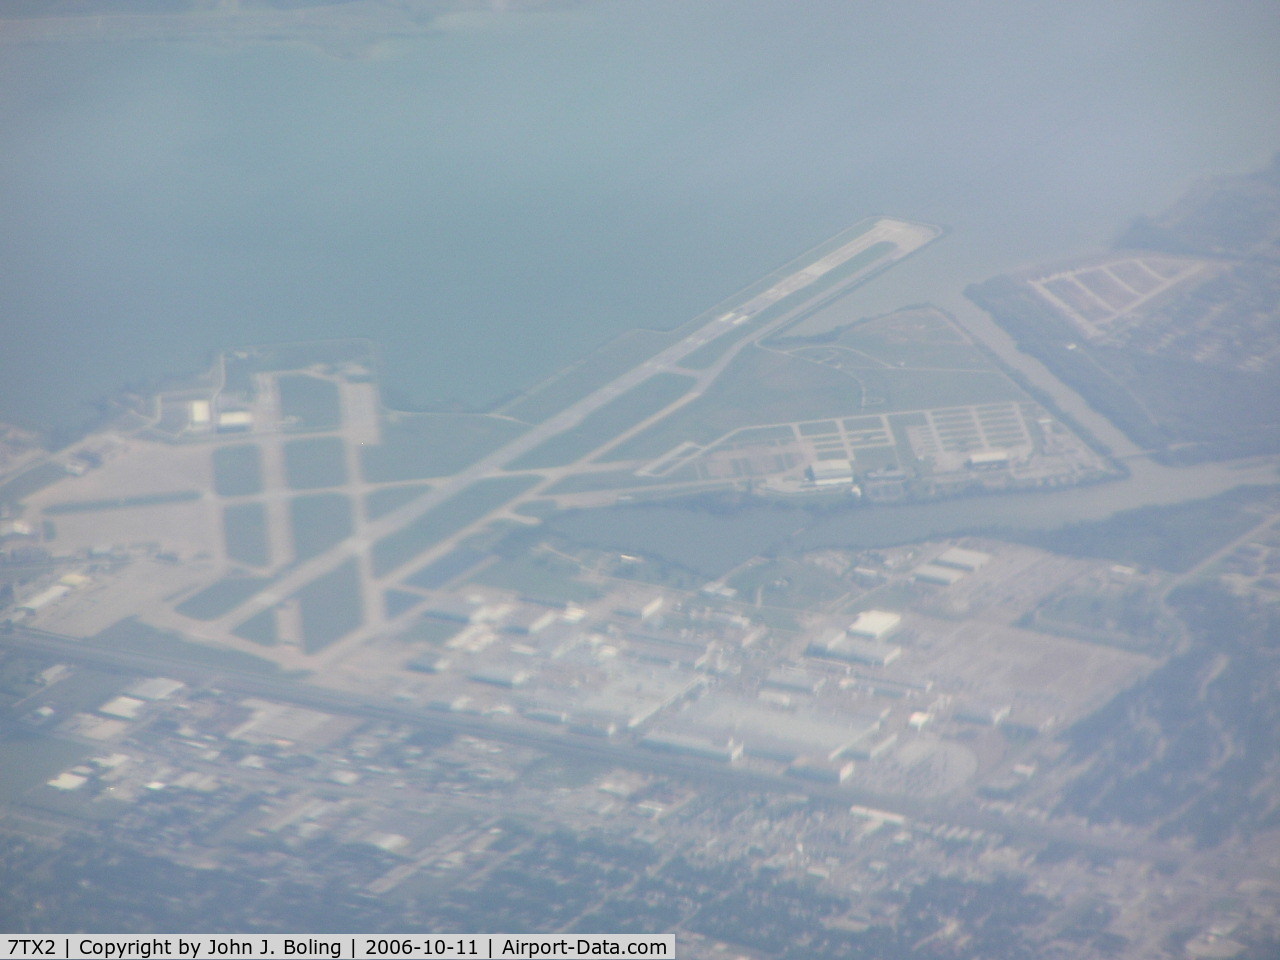 Falcon's Nest Heliport (7TX2) - Former NAS Dallas/Hensley Field. Now named Millennium Dallas Airport